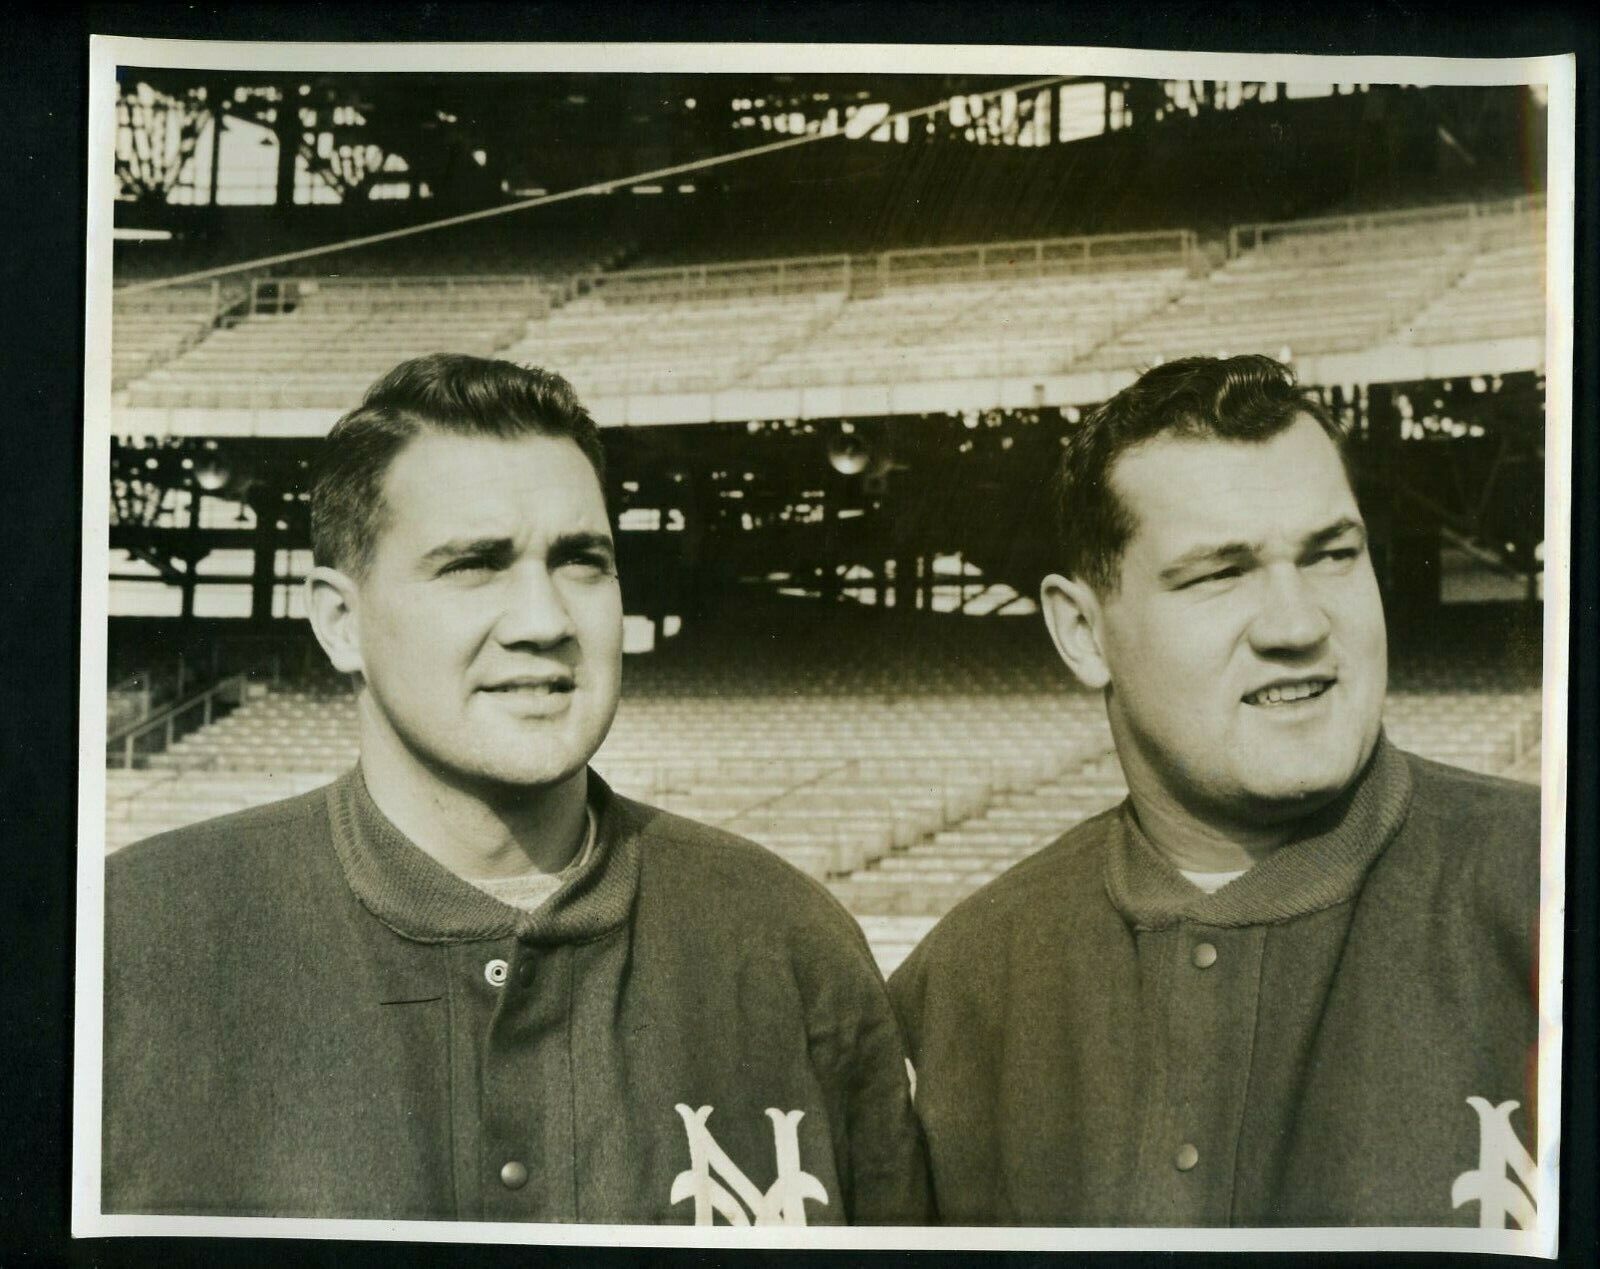 Pat Summerall & Frank Youso 1959 Press Photo Poster painting New York Giants